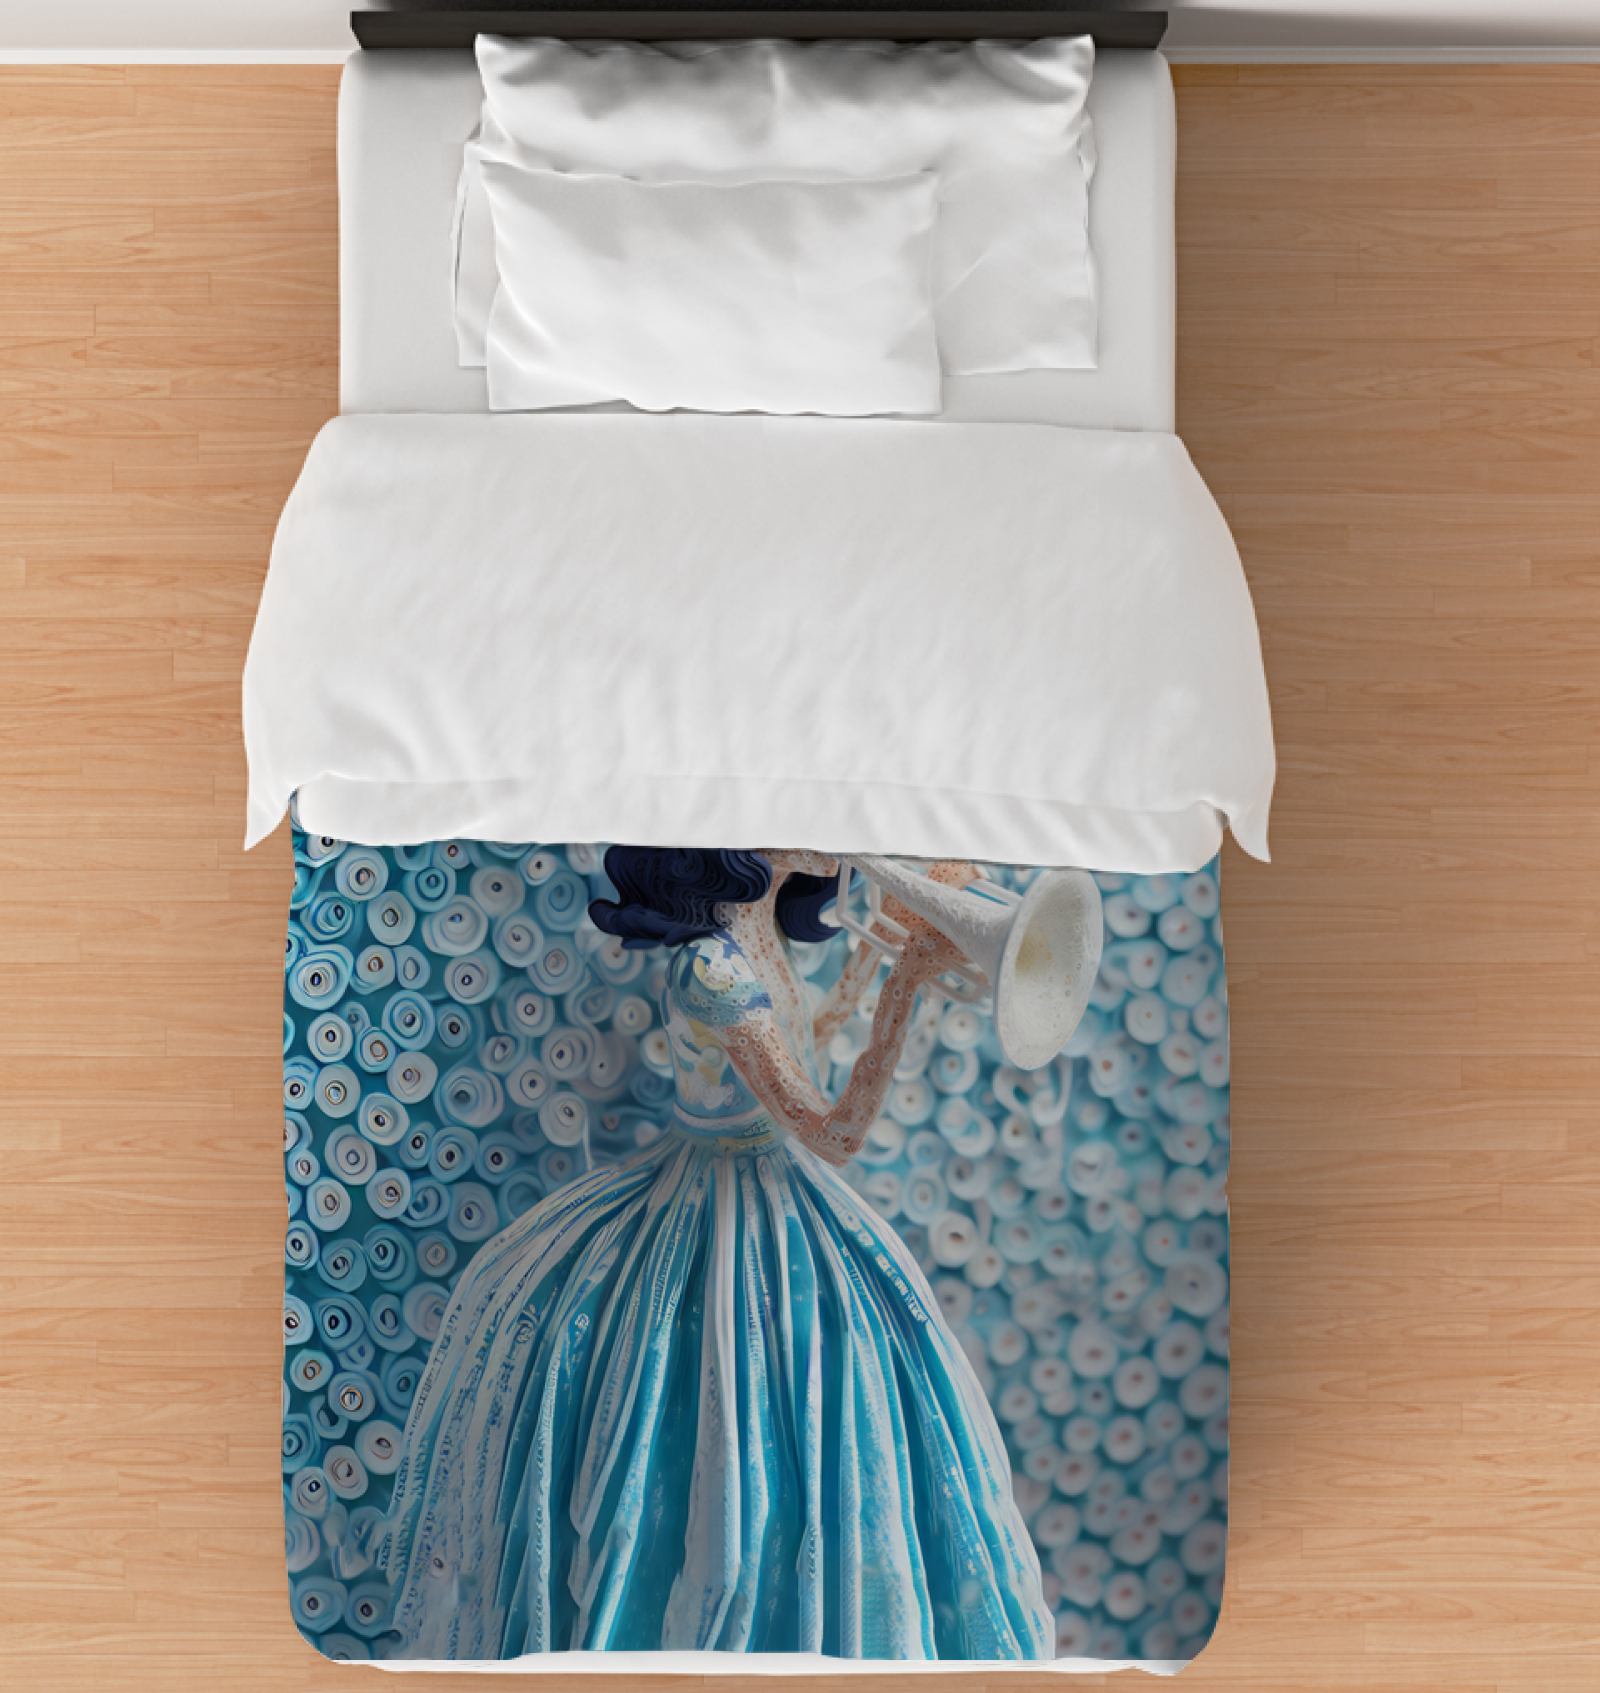 Duvet cover featuring kirigami mountain majesty design.